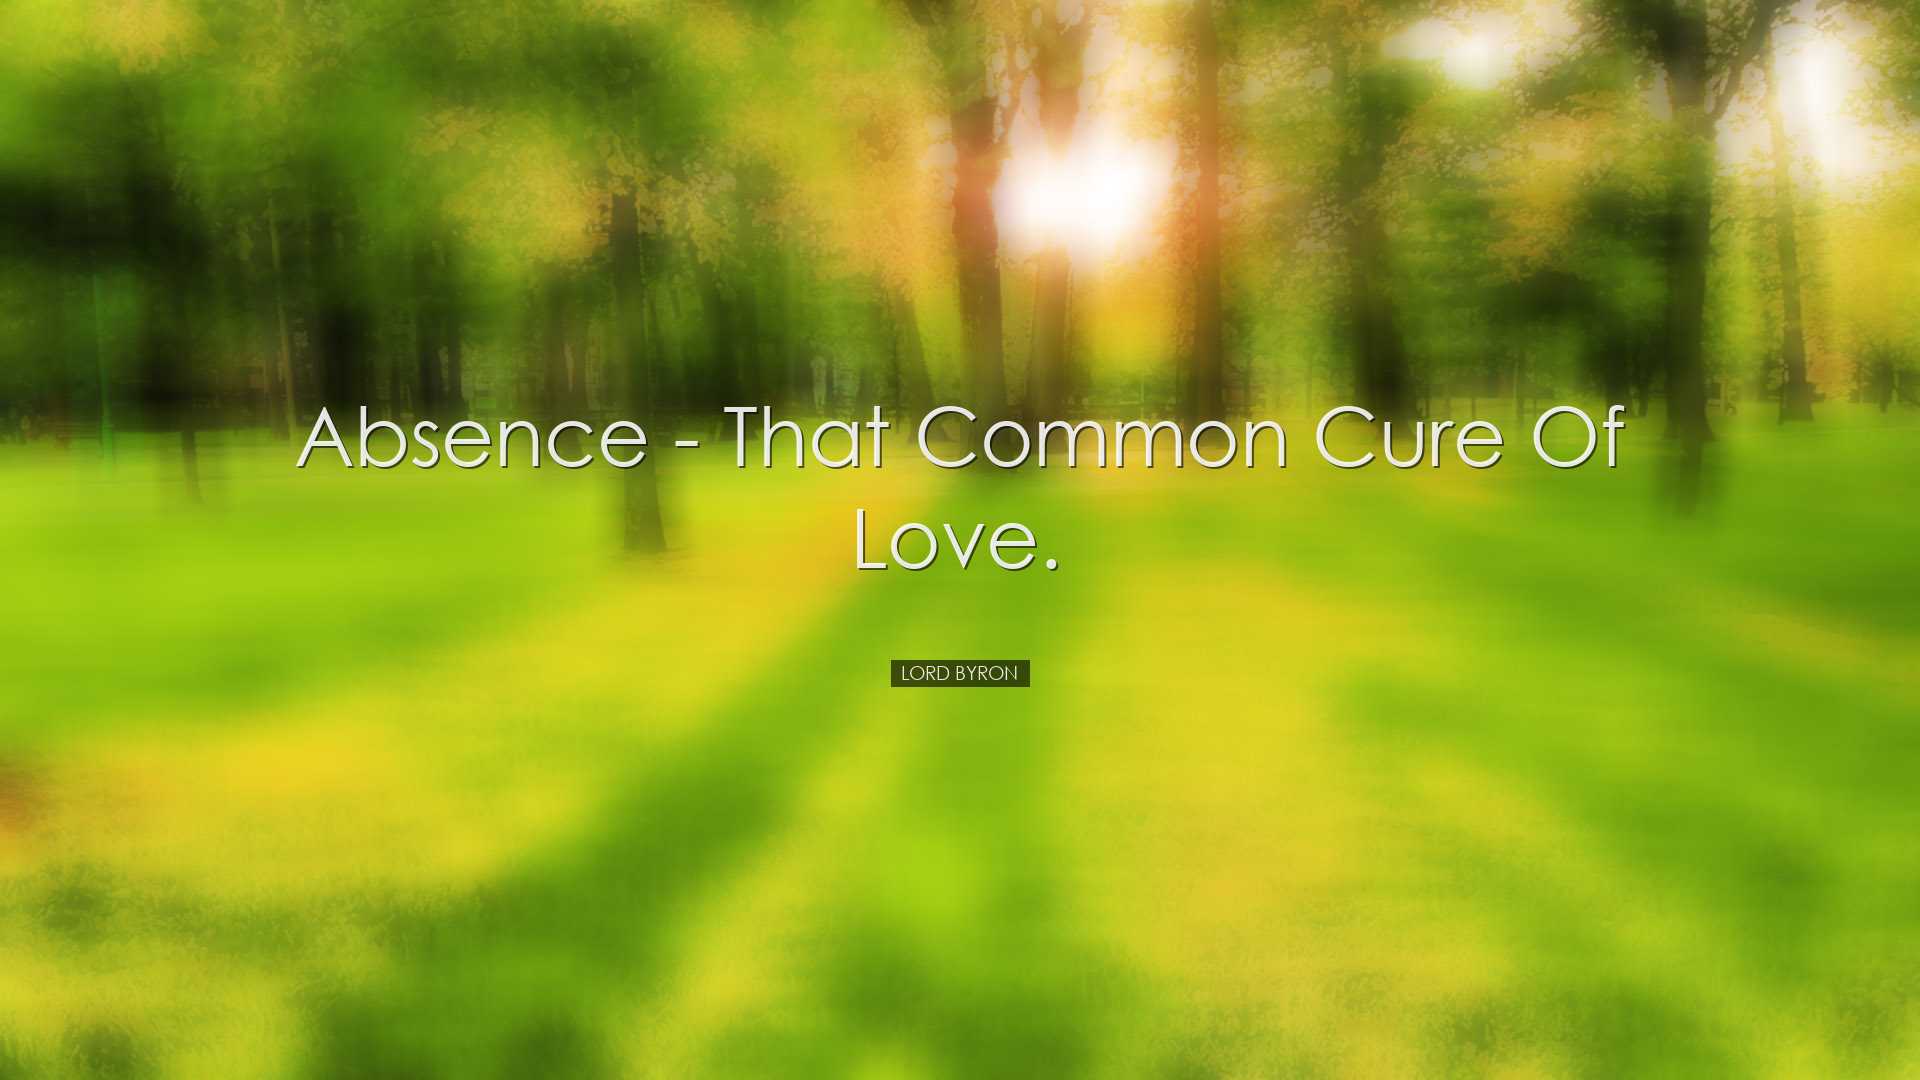 Absence - that common cure of love. - Lord Byron